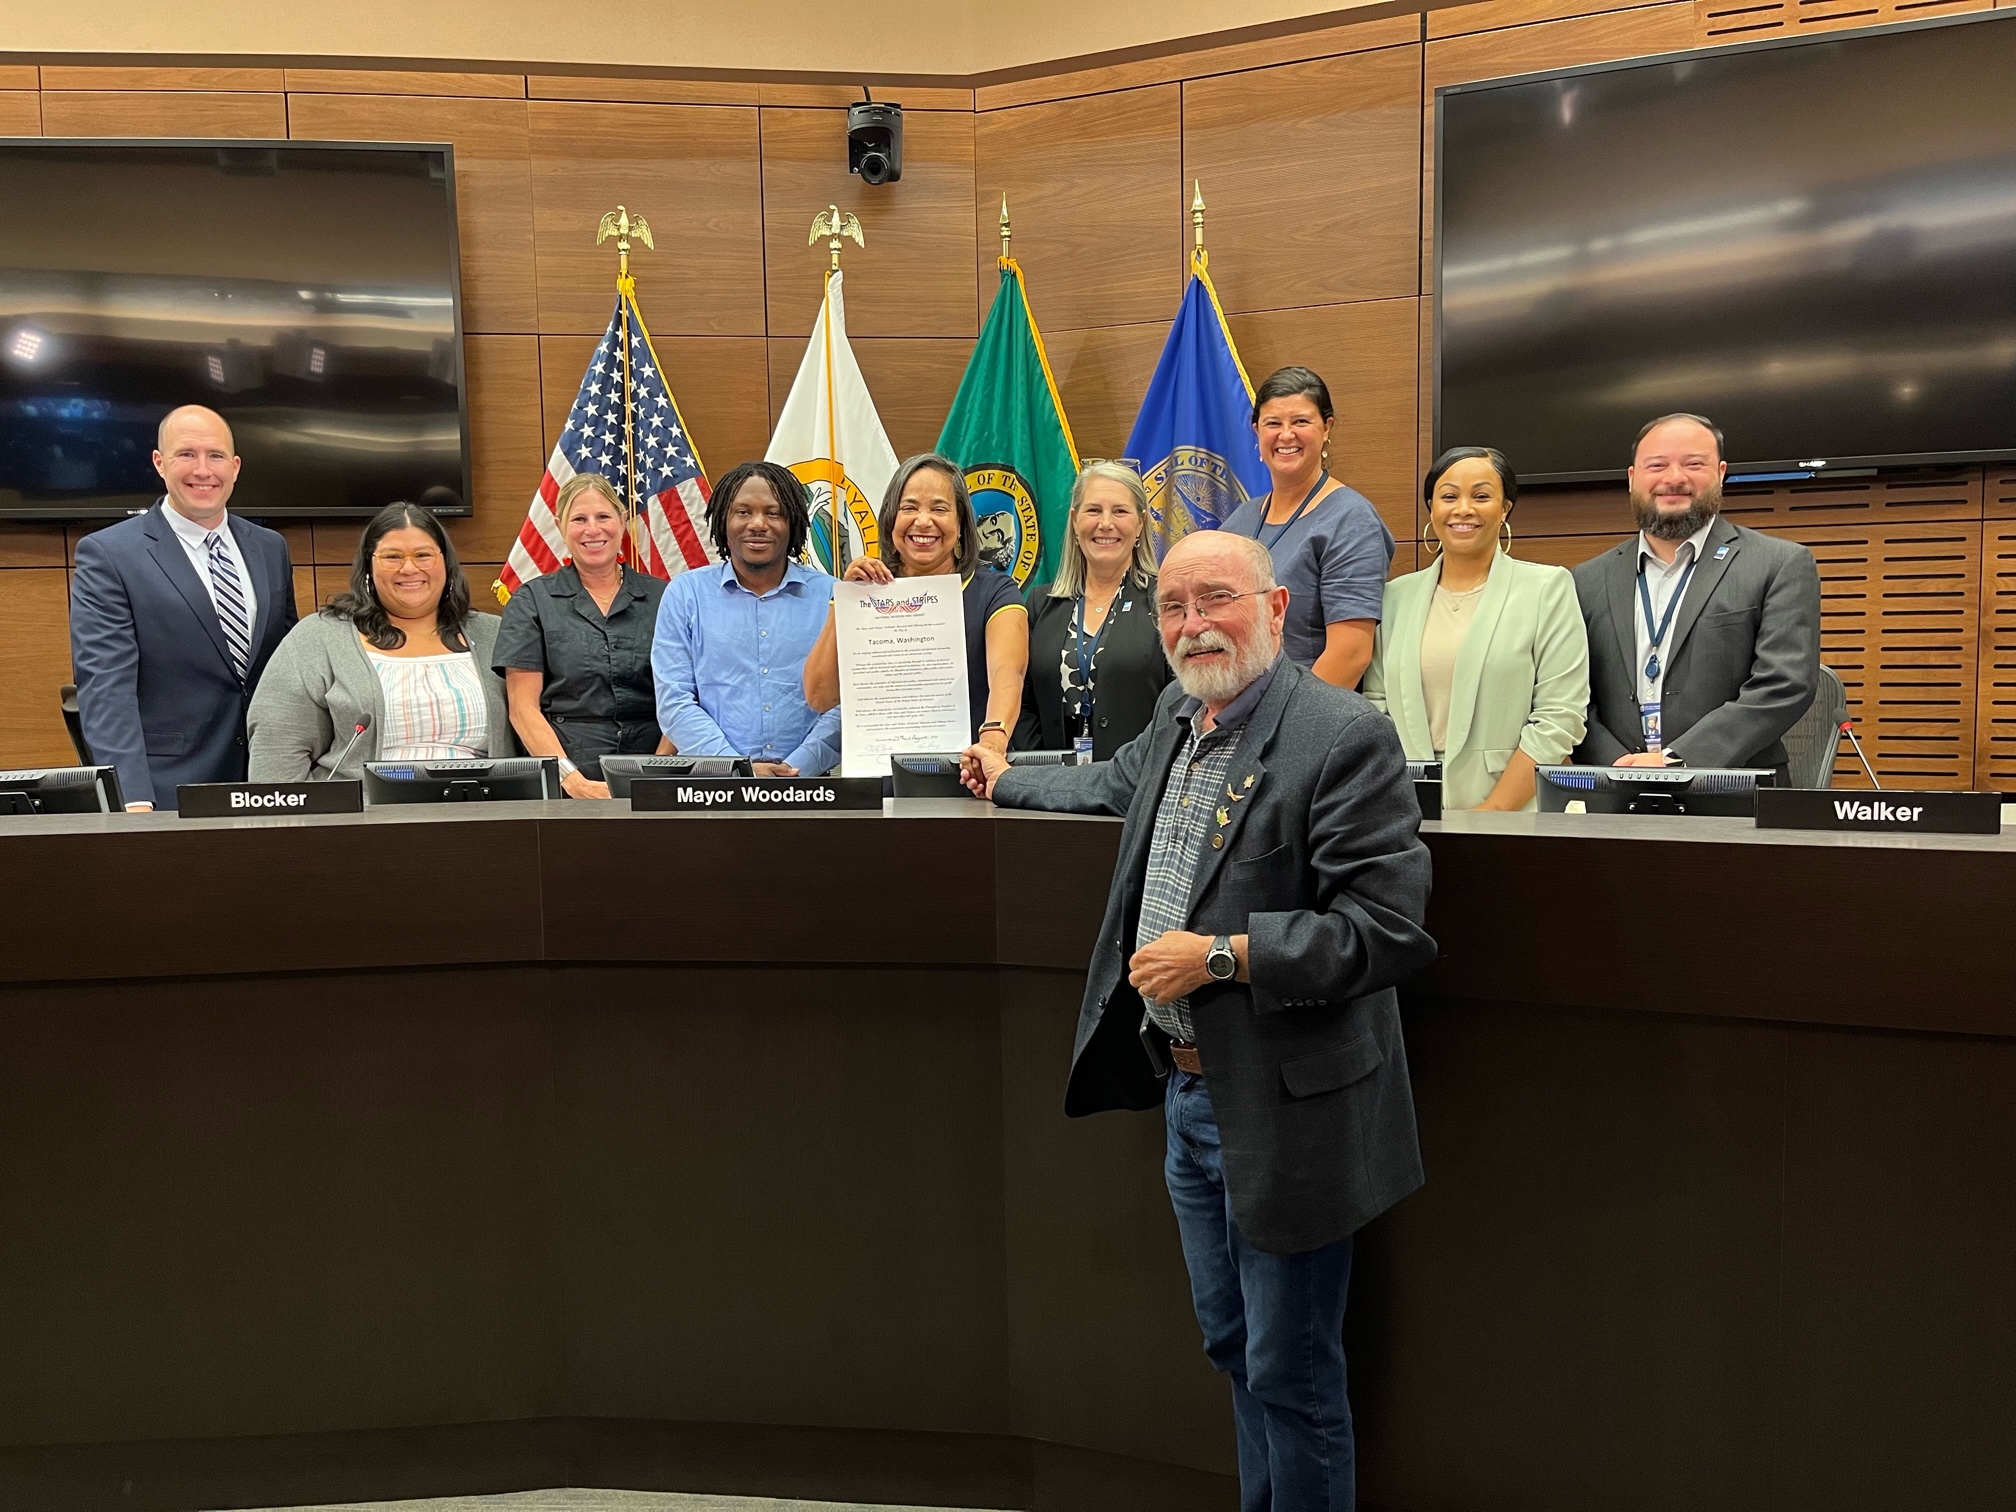 On Tuesday, August 23, 2022, Jim Martin presented the Stars and Stripes City Proclamation to Tacoma, Washington which was accepted by Mayor Woodards and the City Council of Tacoma